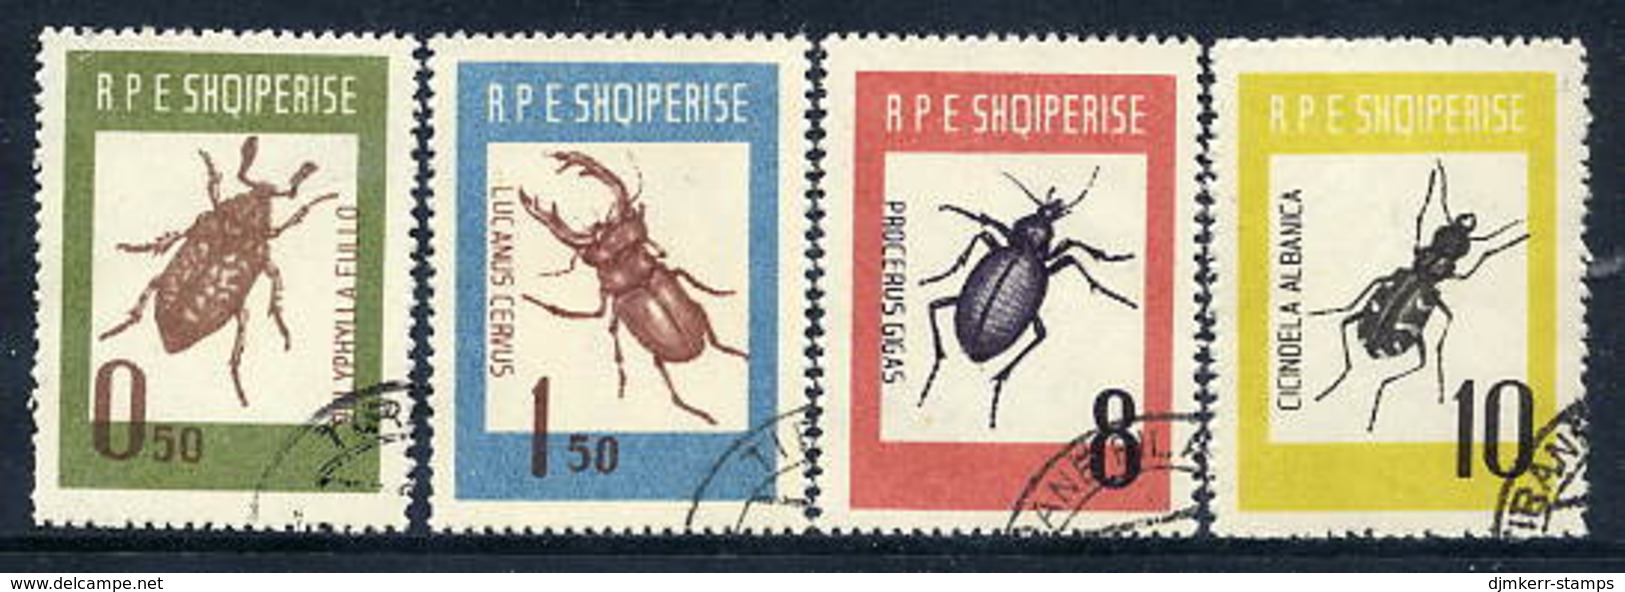 ALBANIA 1963 Insects Set Used.  Michel 735-38 - Albania